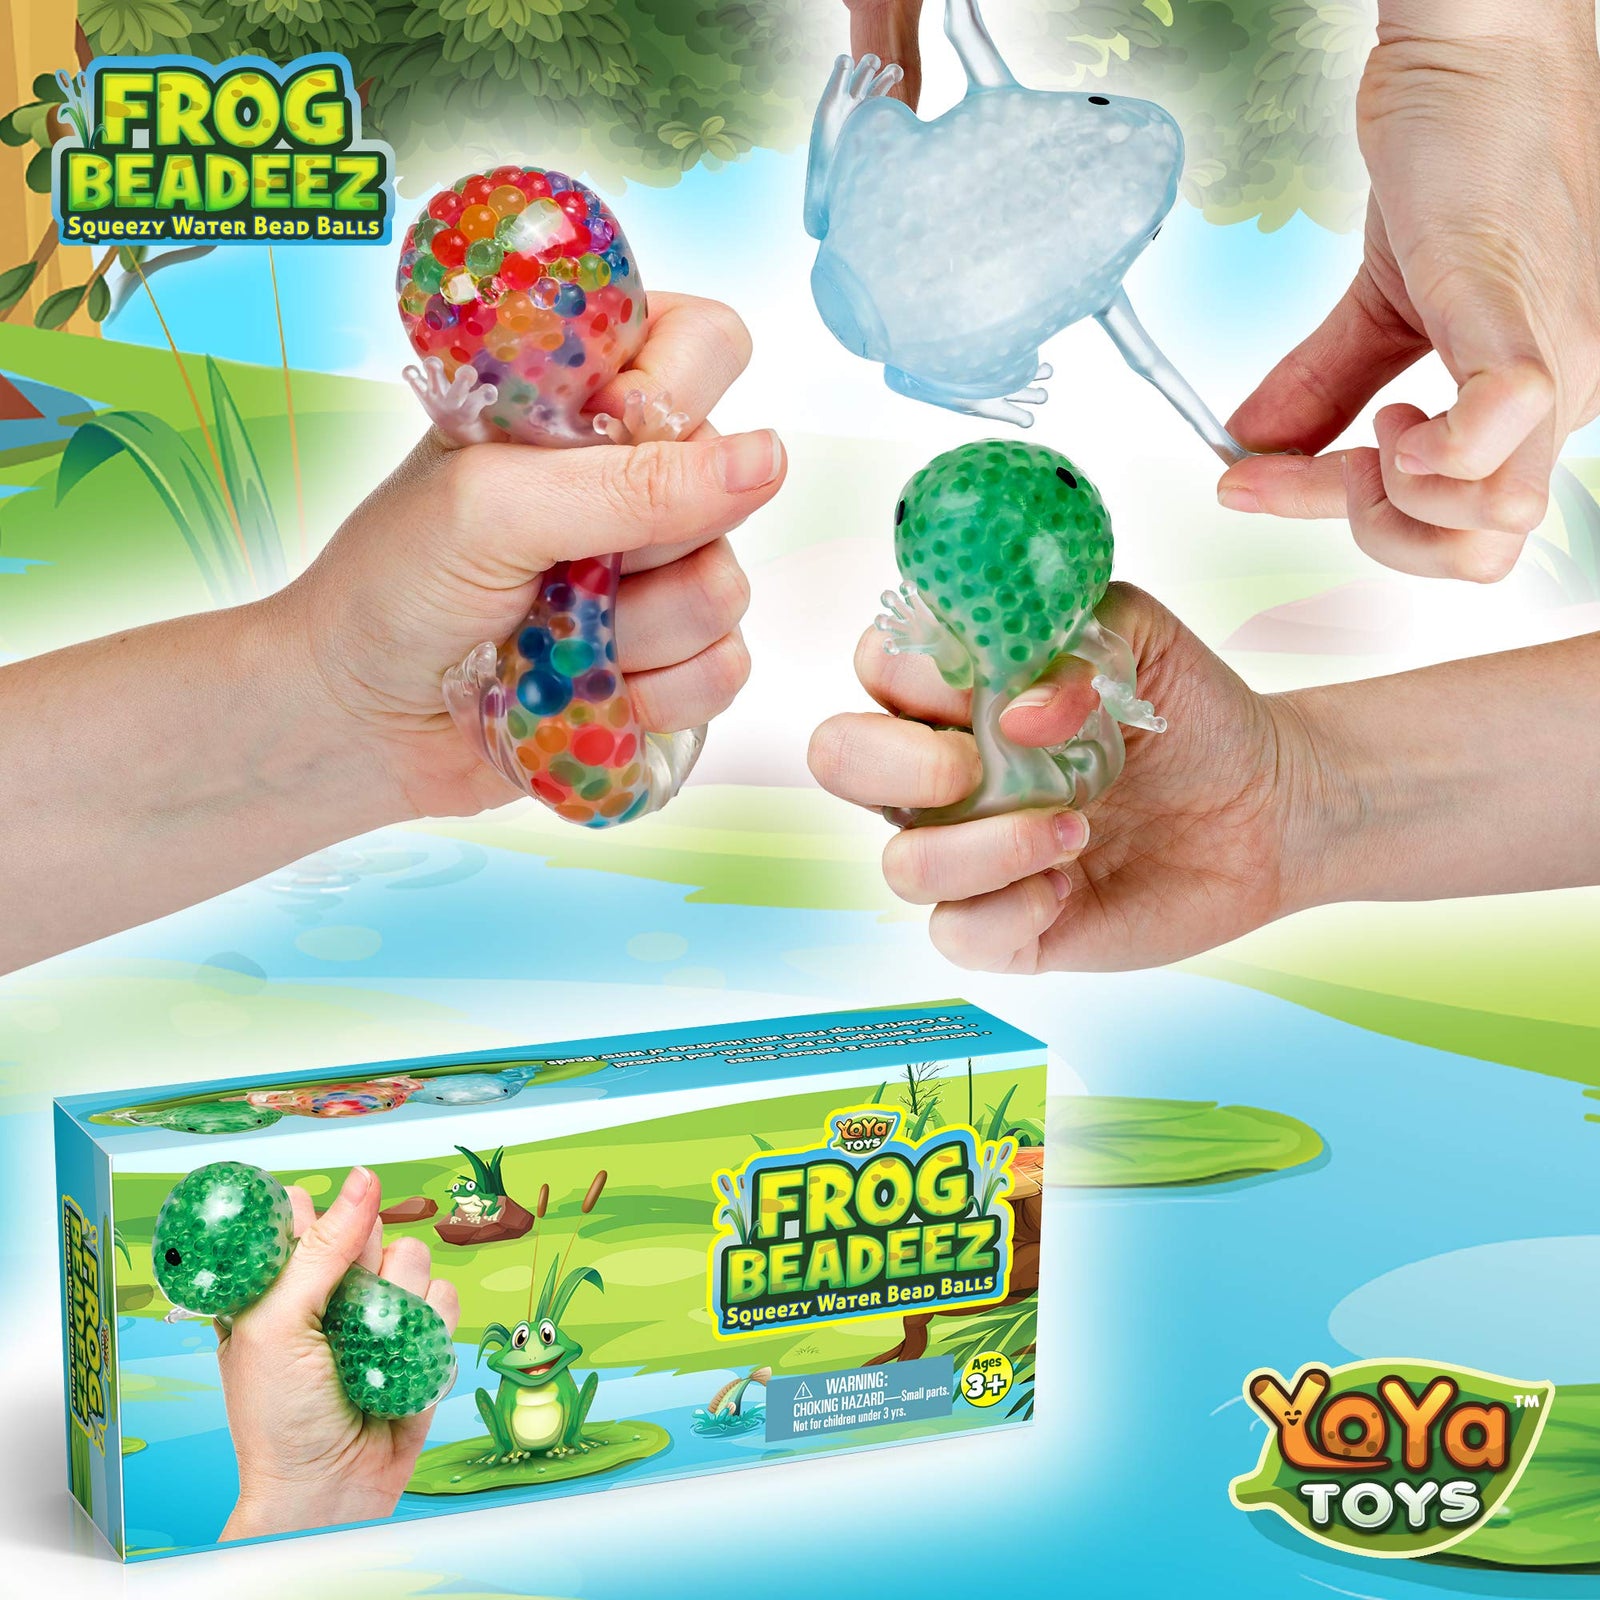 Frog Beadeez 3 Pack Stress Balls for Kids and Adults with Squishy Water Beads, Animal Shaped Stress Relief Toys, Fidget Sensory Toys for Autistic Children, ADHD, Anxiety, Animal Birthday Party Favors